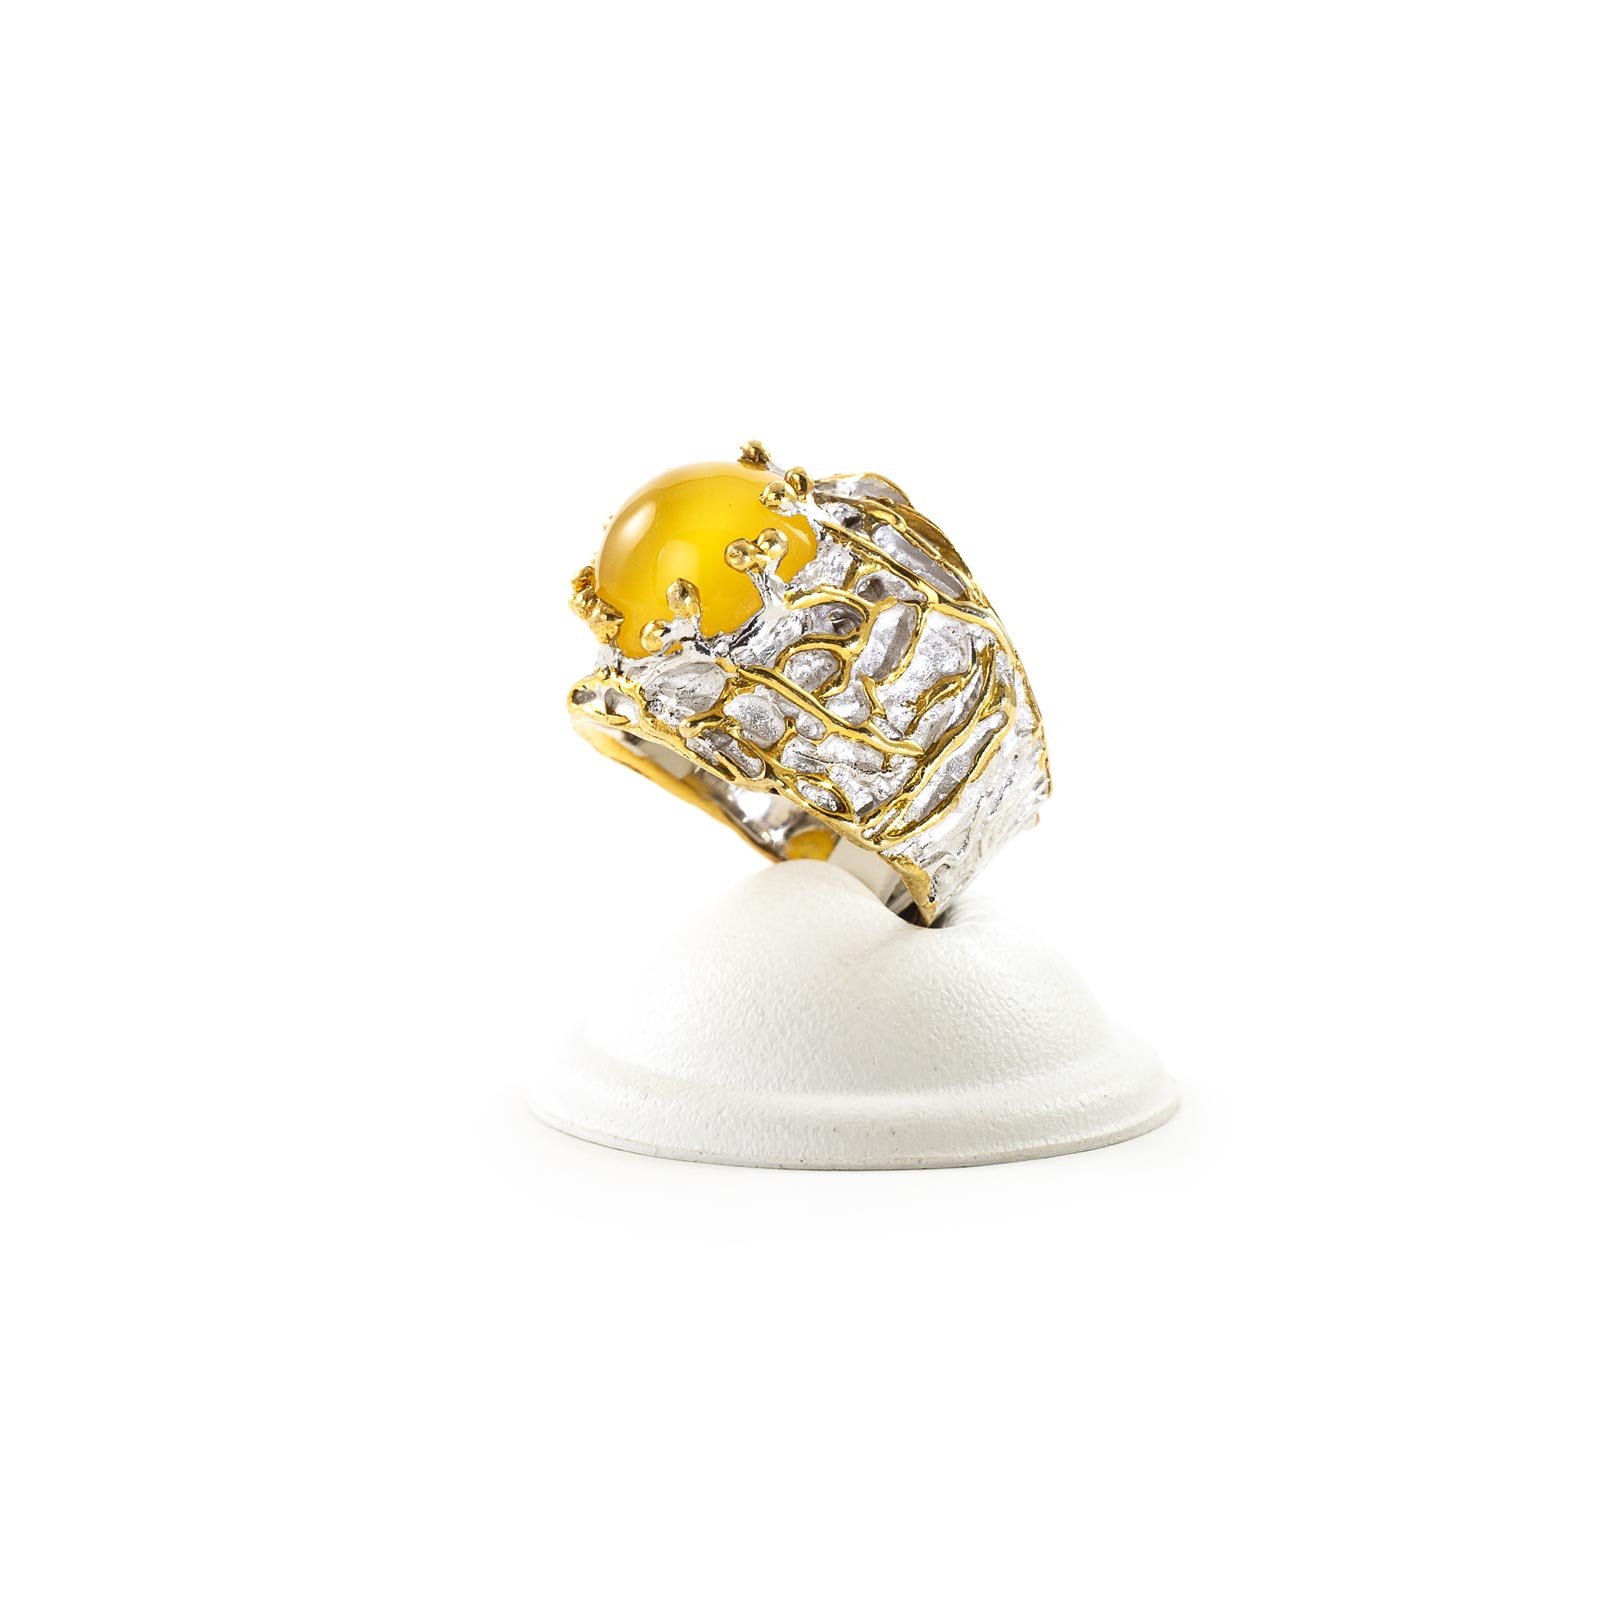 Queen Anne's Lace Diamond Ring - Naama Jewellery - High End jewellery Design